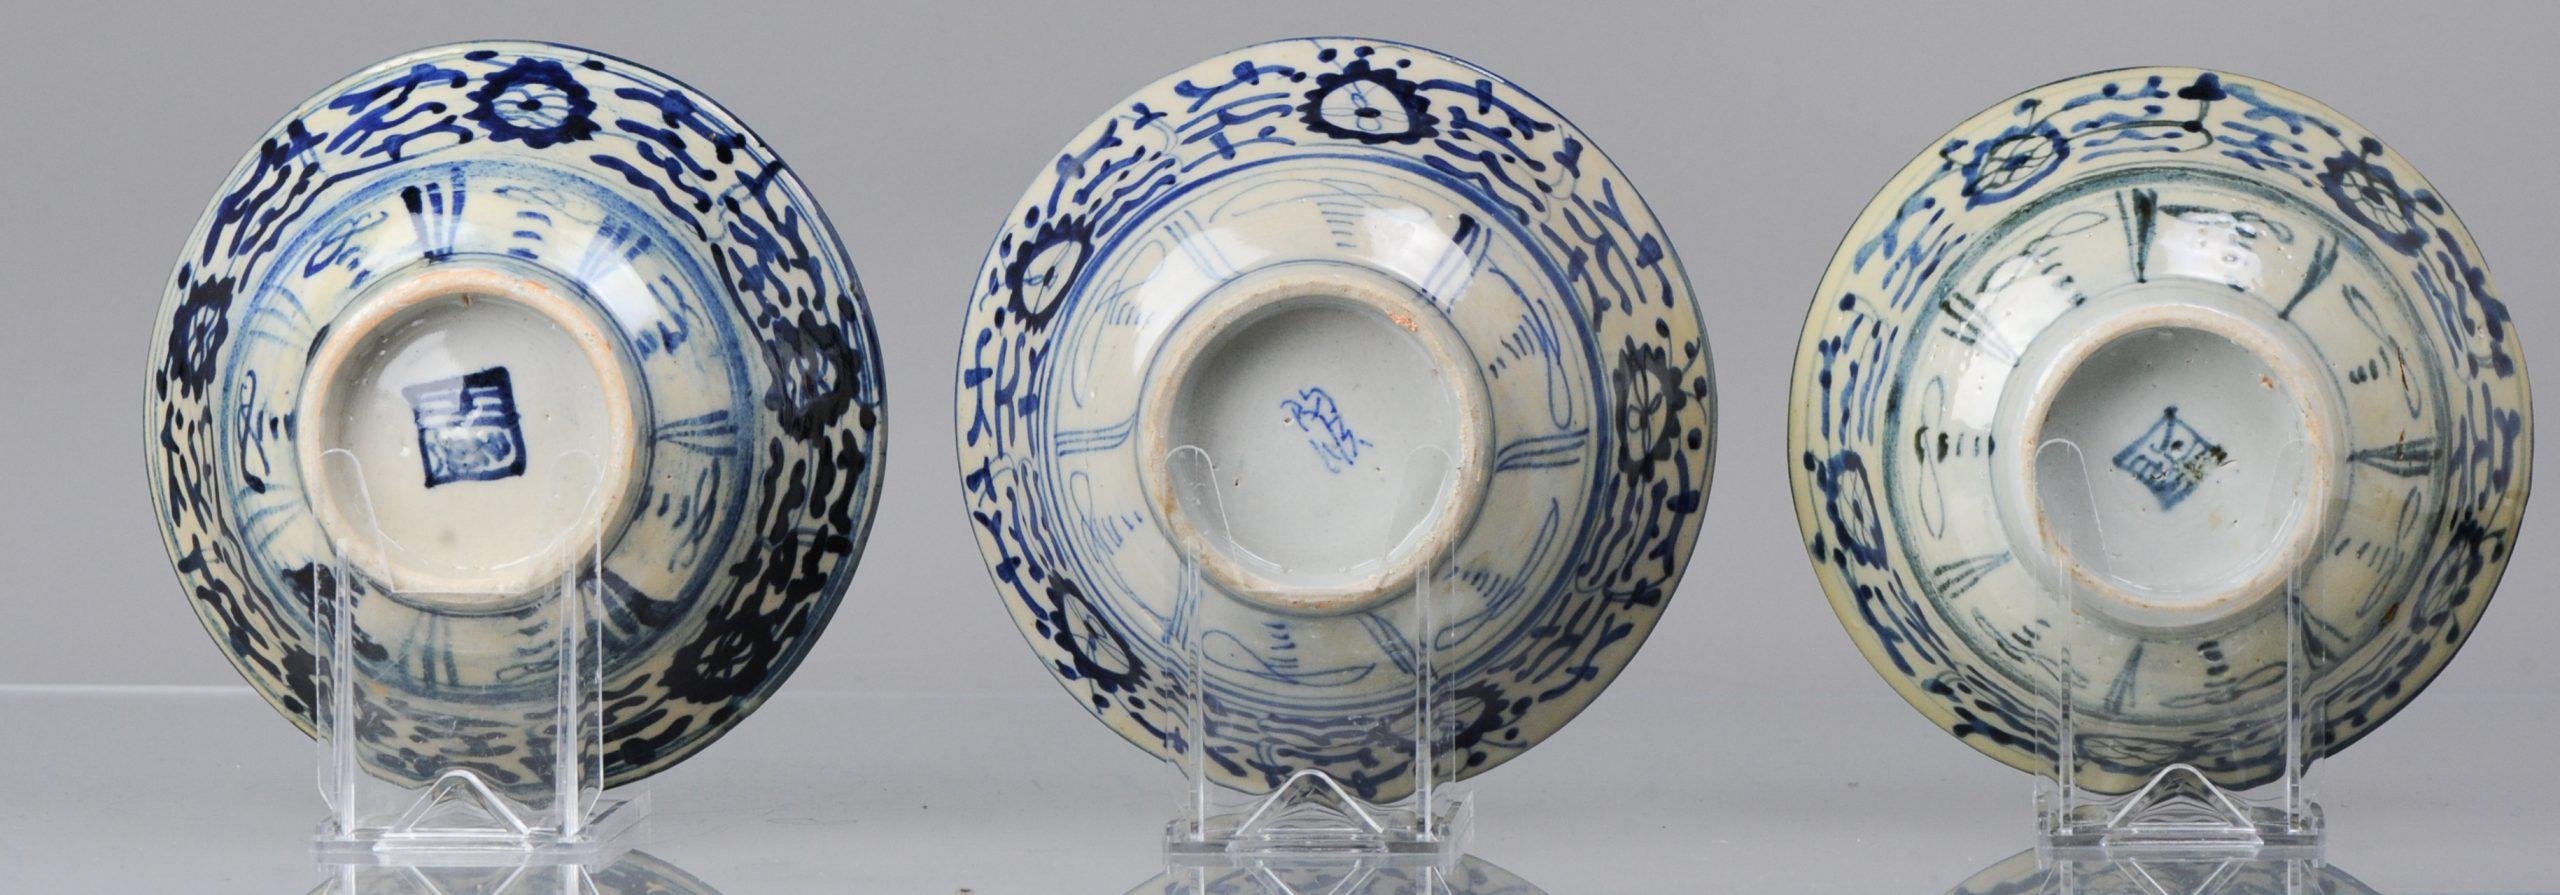 19th Century Set of 3 Large Chinese Porcelain Kitchen Qing Bowls South East Asia, 19th Cen For Sale